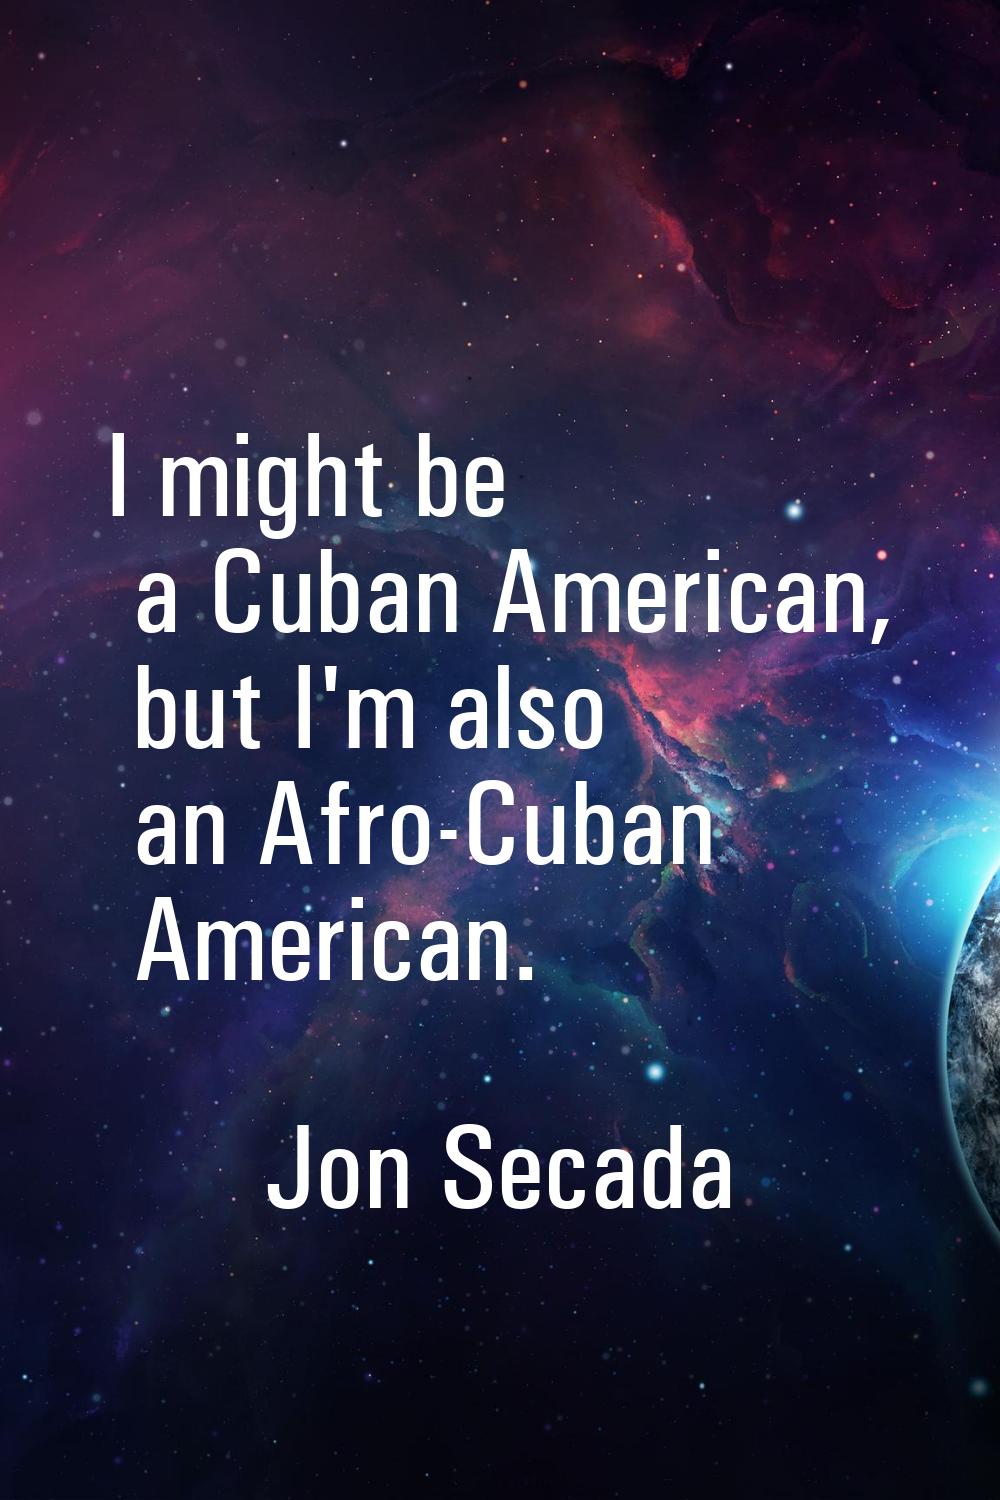 I might be a Cuban American, but I'm also an Afro-Cuban American.